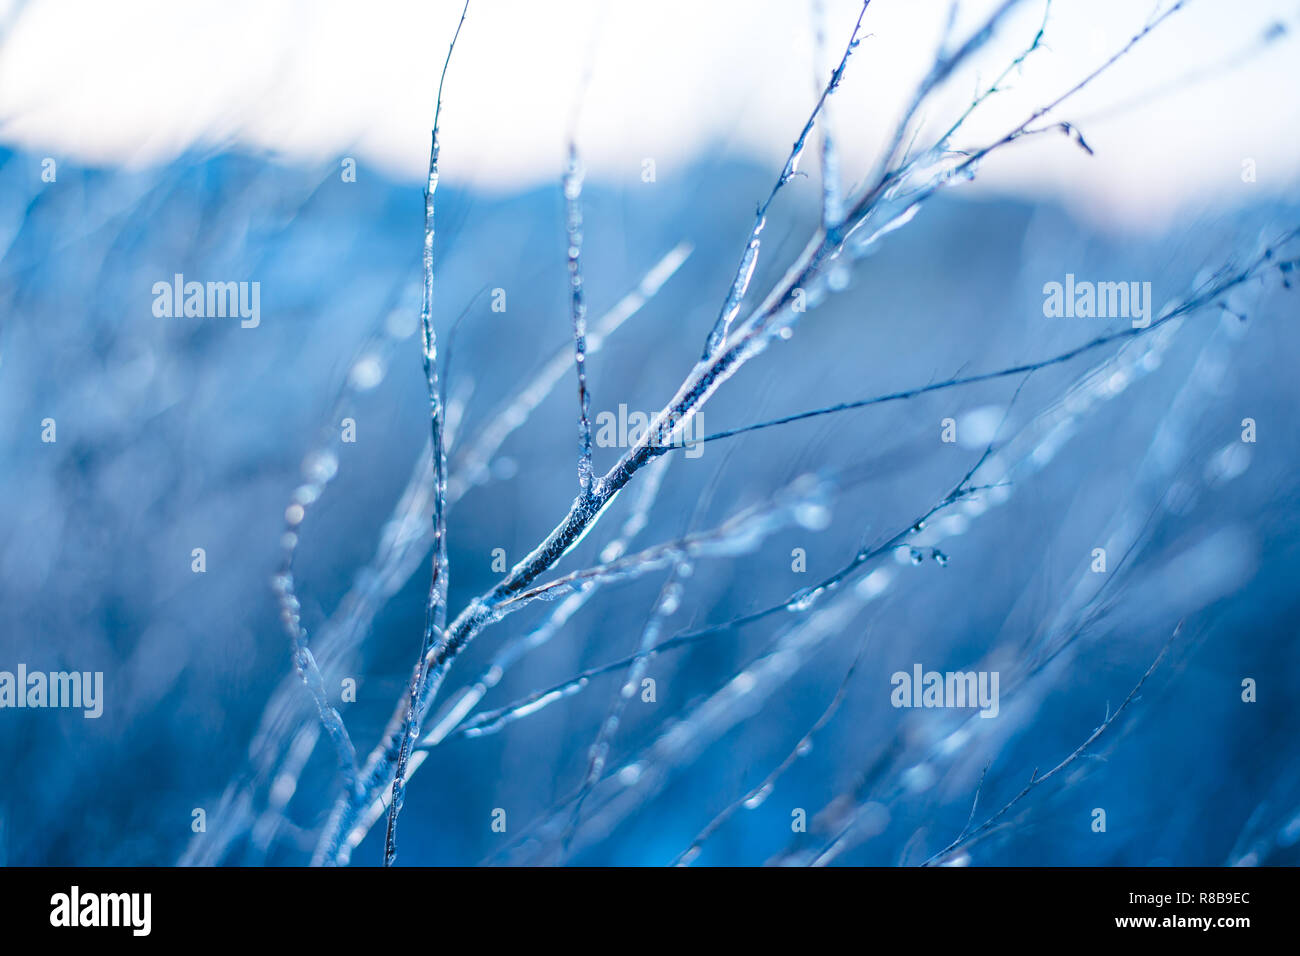 Frozen beautiful plants covered with icicles. Winter background. Selective focus. Shallow depth of field. Stock Photo